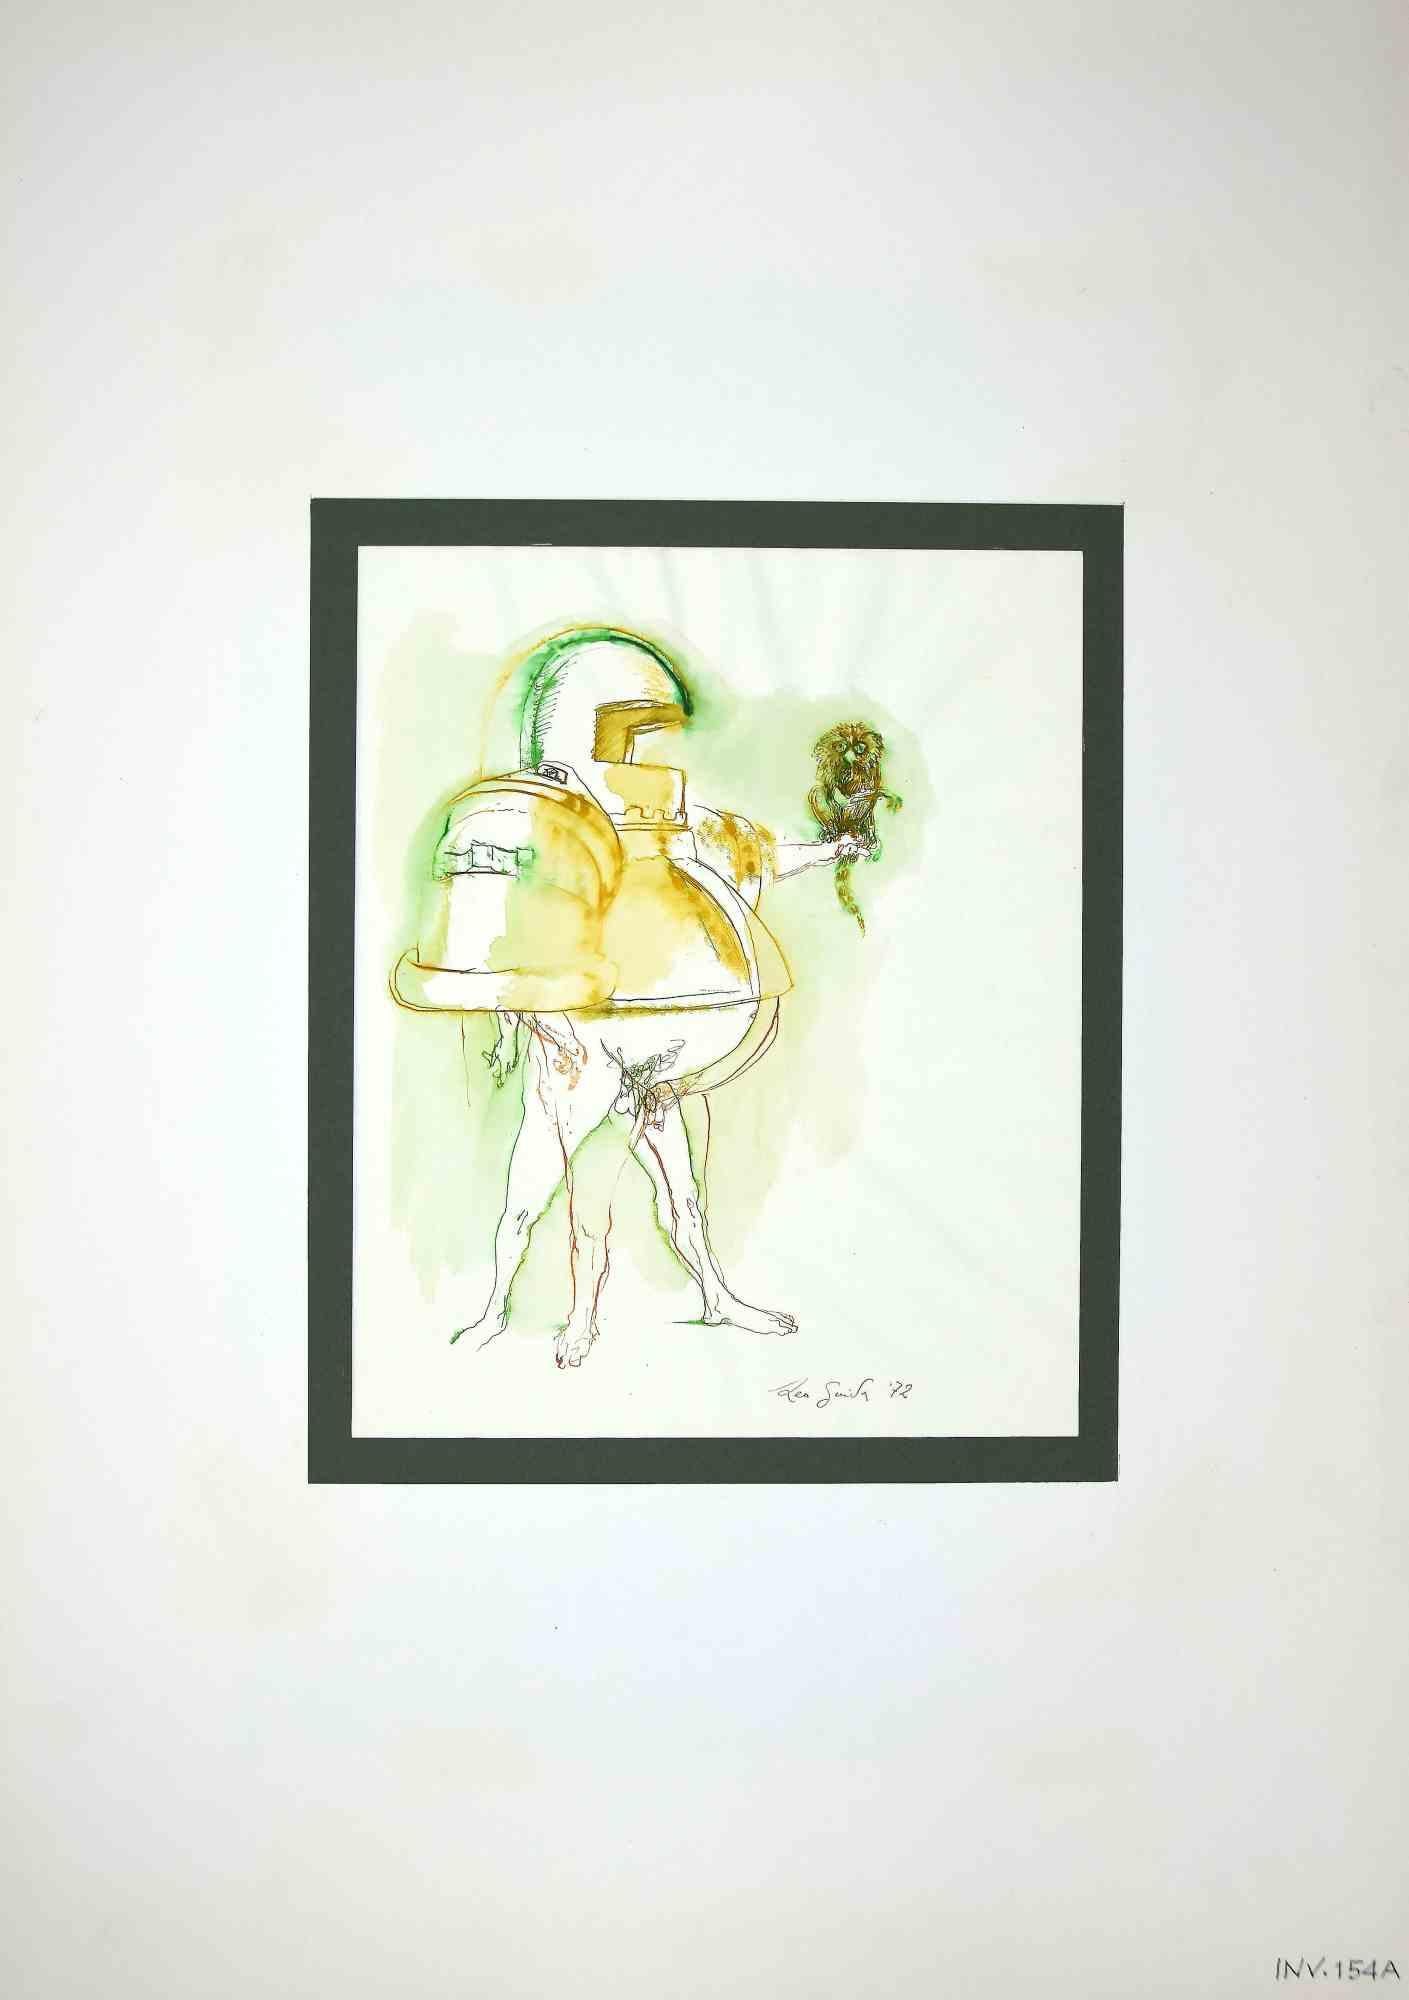 Knight and Lemur is an original drawing in china ink realized by Leo Guida in 1972.

Guter Zustand.

Hand-signed.

The artwork is depicted through strong strokes.